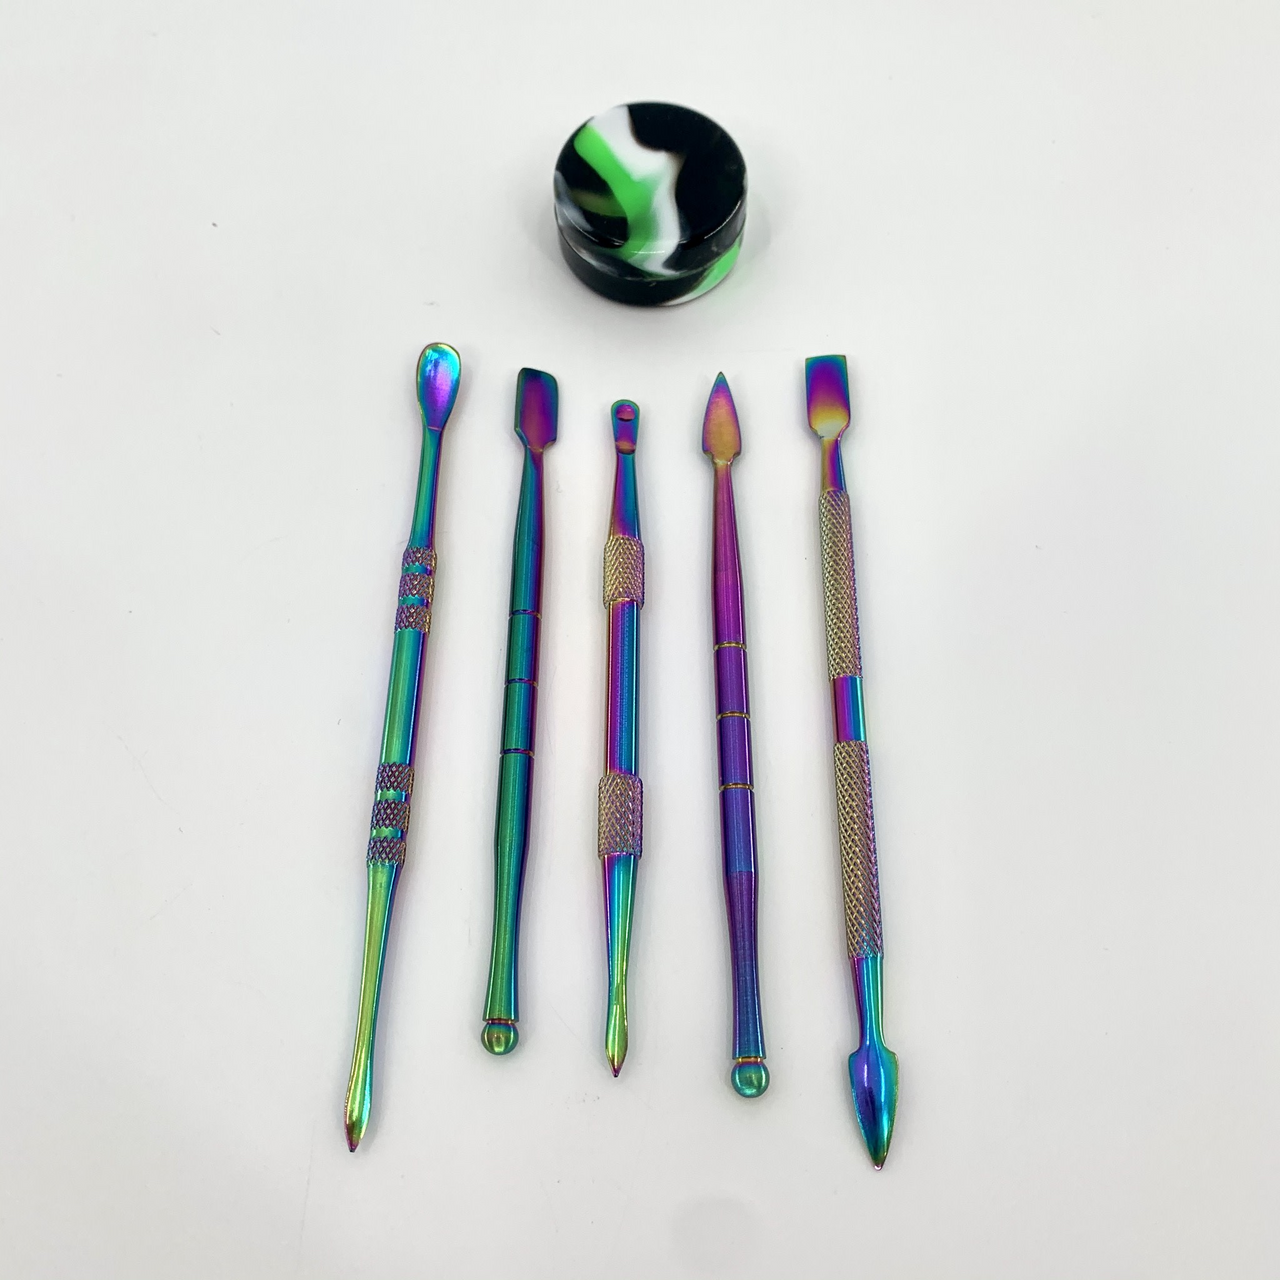 Stainless Steel 5pc Iridescent Dab Tool Set with Case